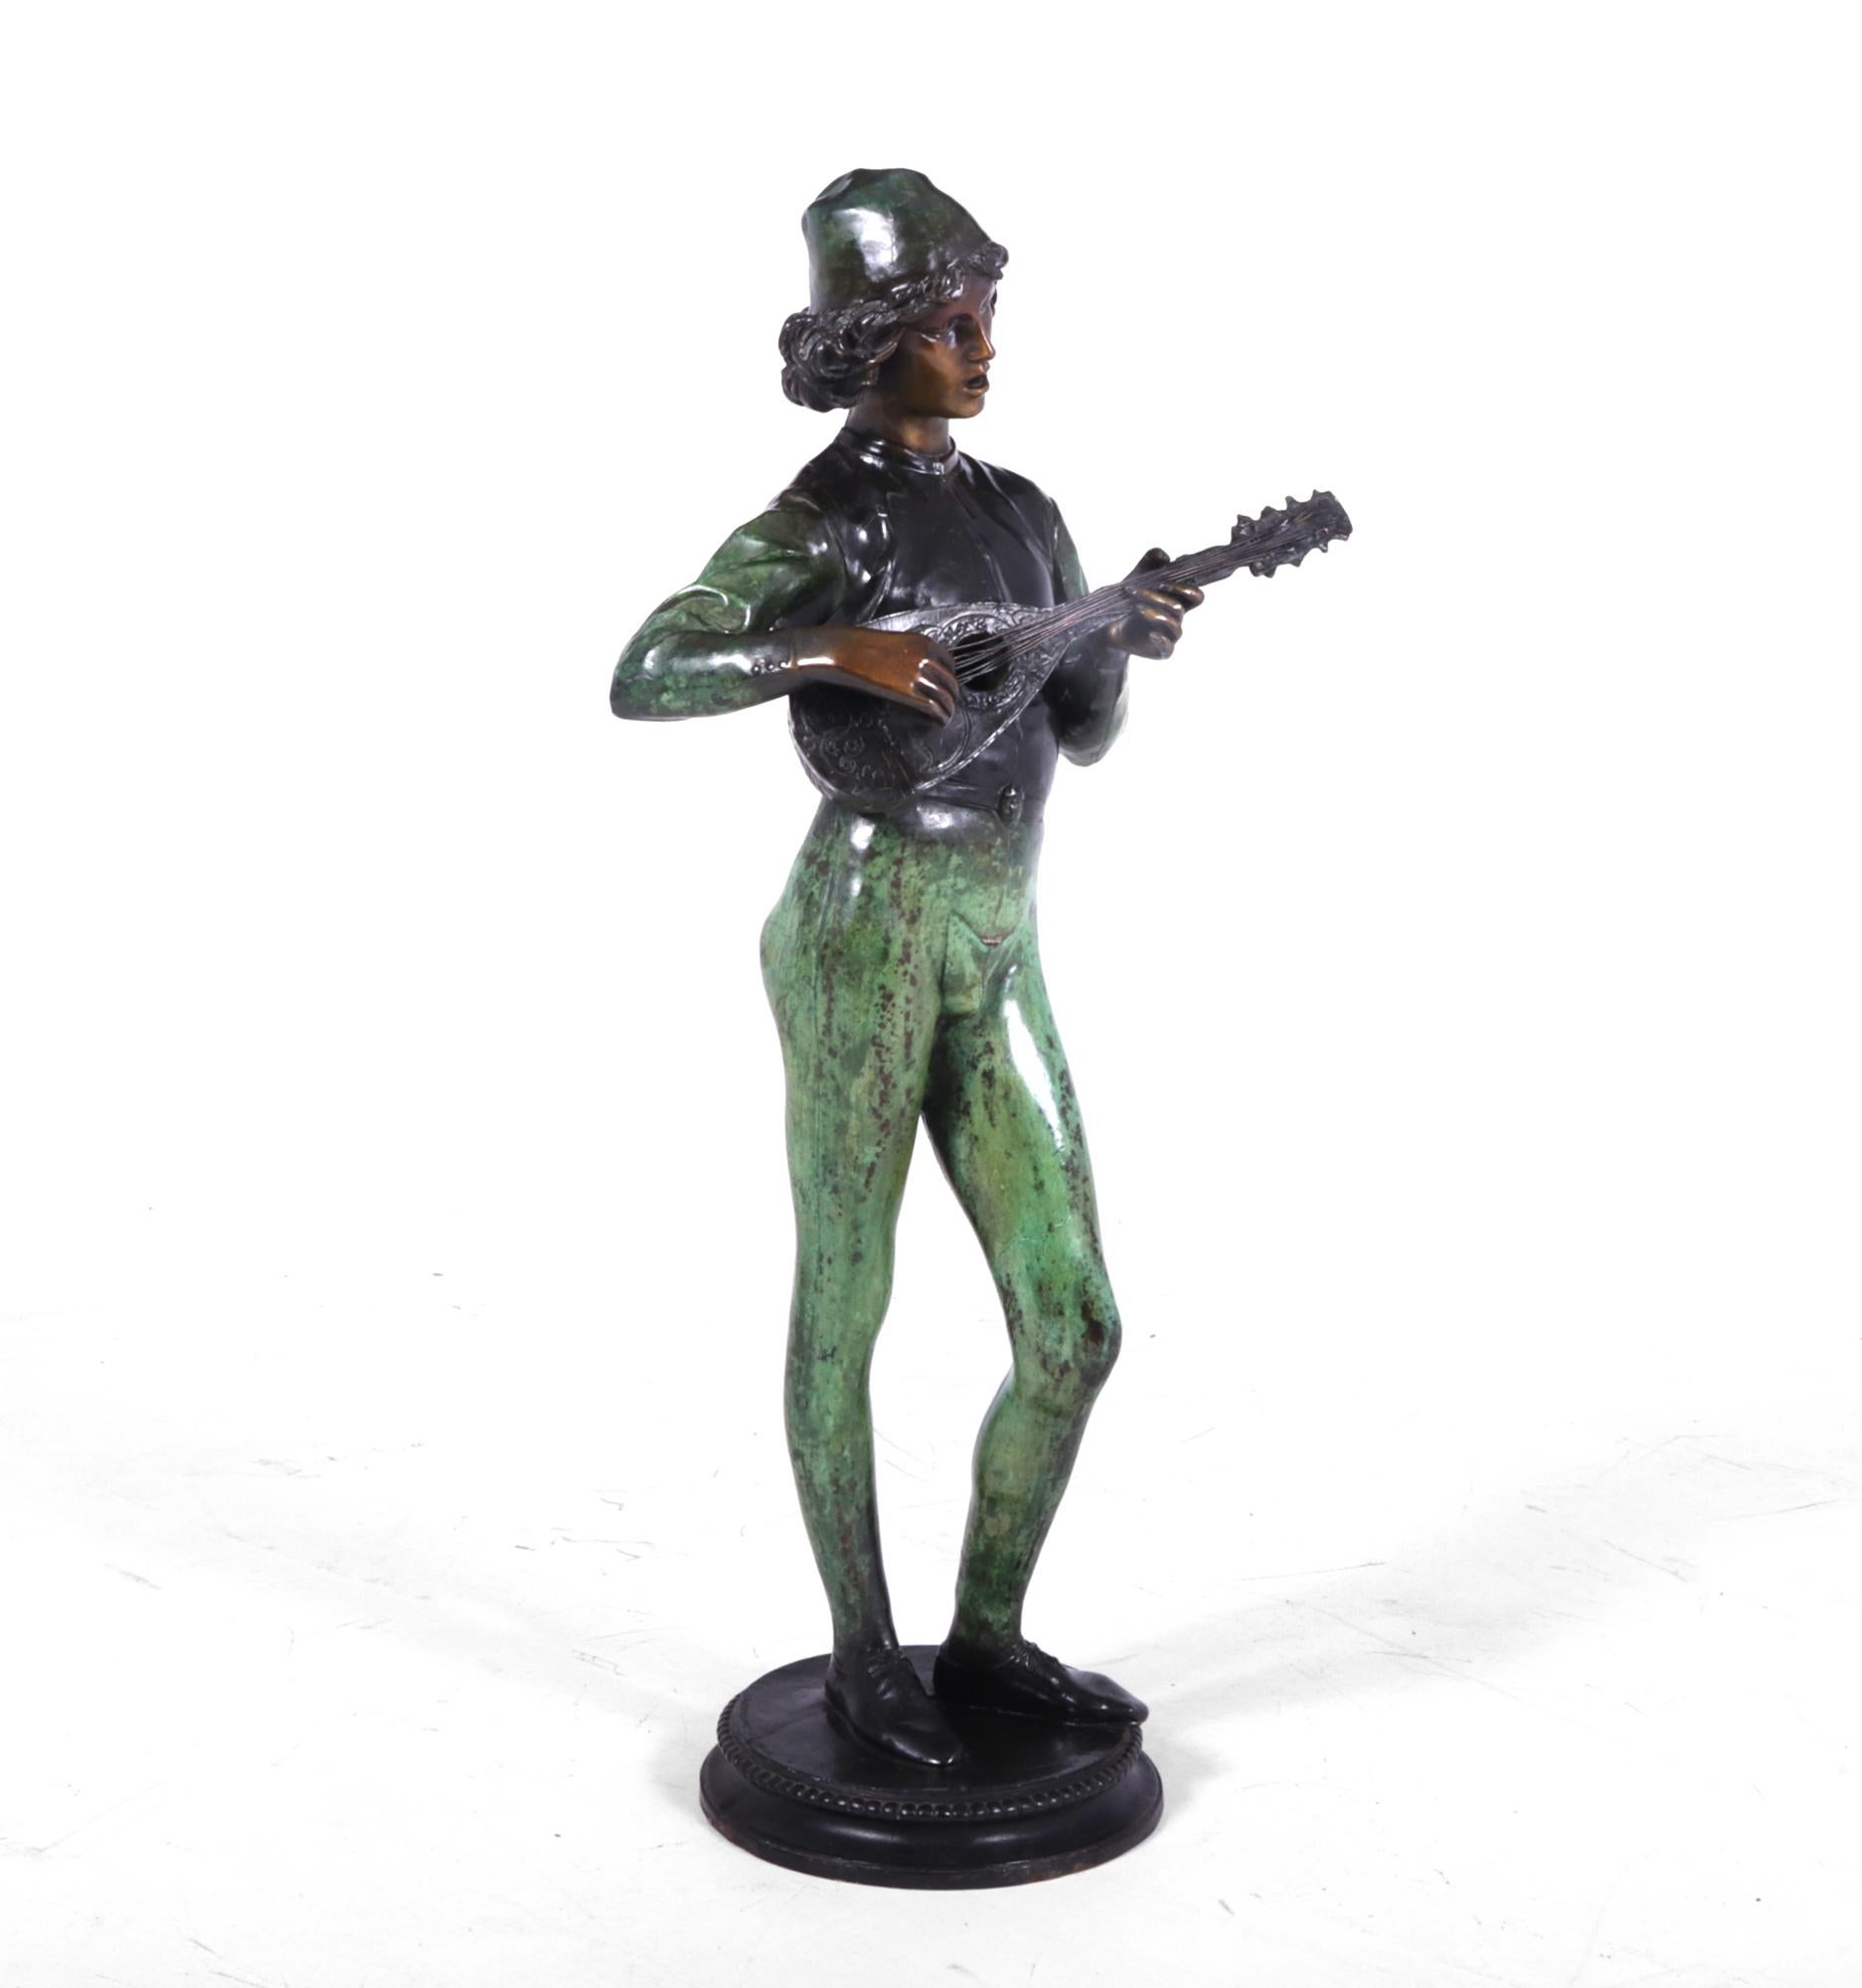 Antique bronze sculpture ‘Standing Music Man’ by Barbedienne Fondeur c1880
Sculpted by P Dubois in 1865, the music man was cast by Barbedienne Fondeur this example is 72 cm tall and cold painted with green legs and arm sleeves and great patina, the